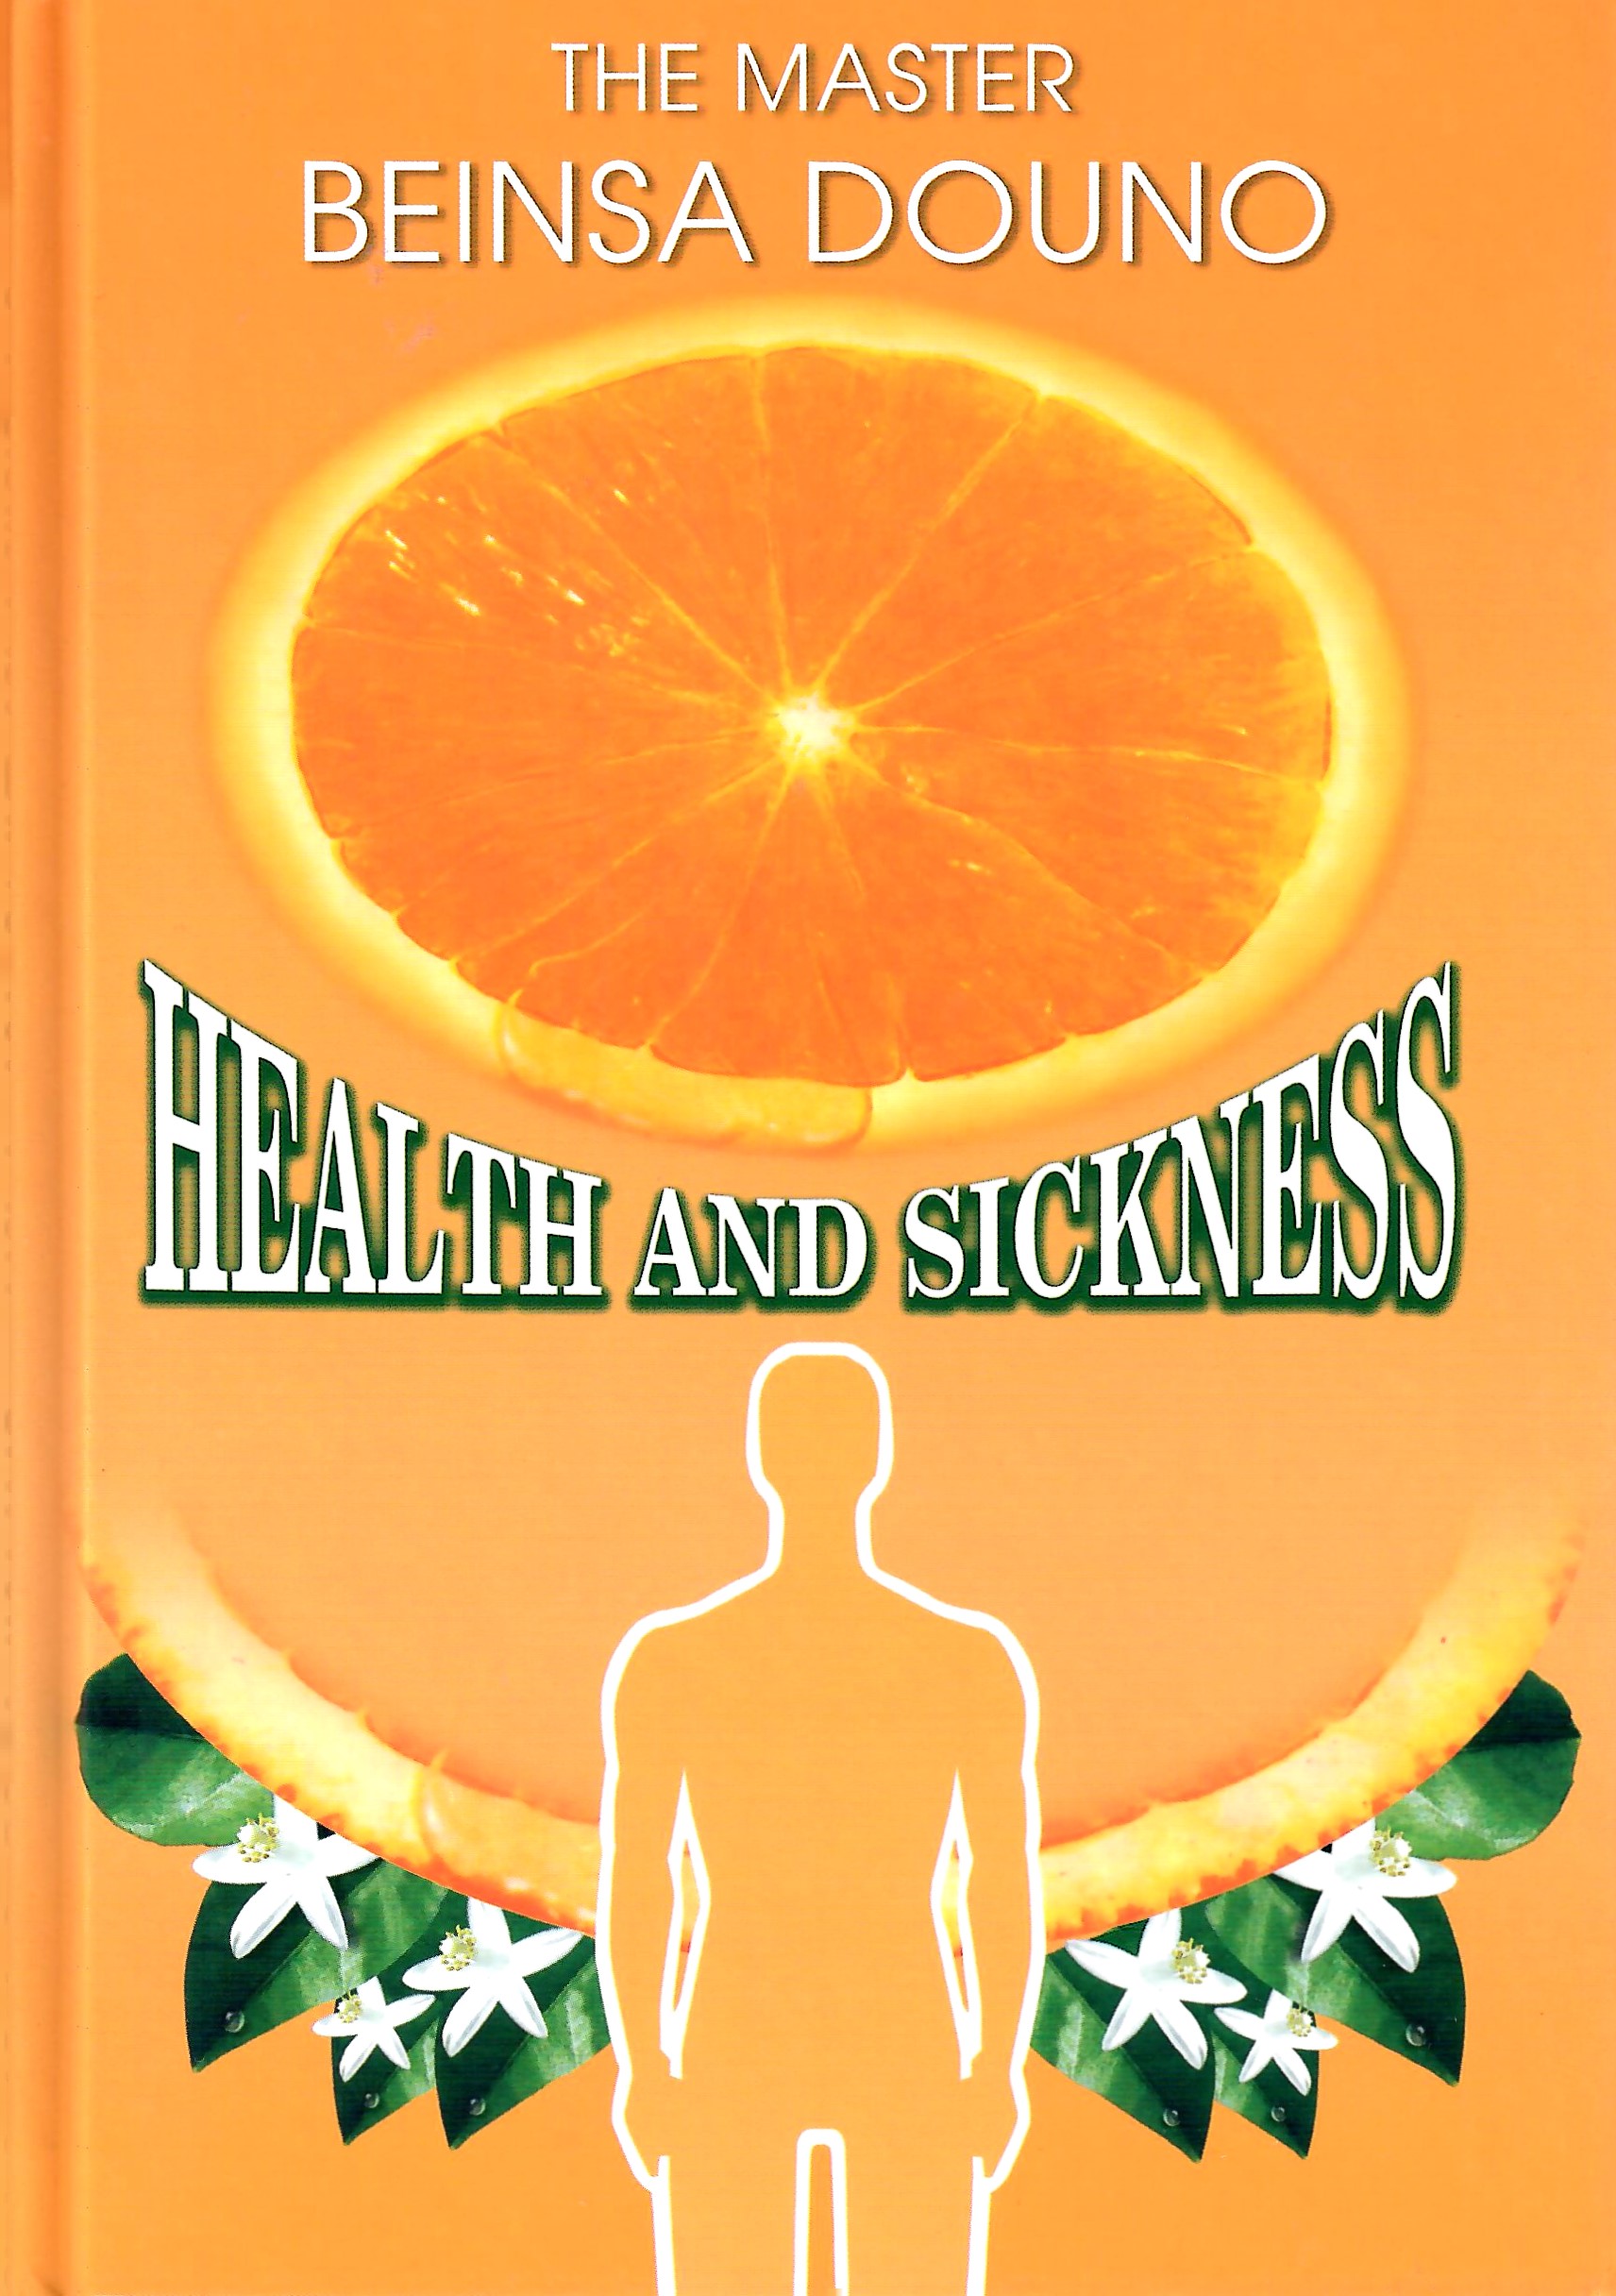 Health and Sickness